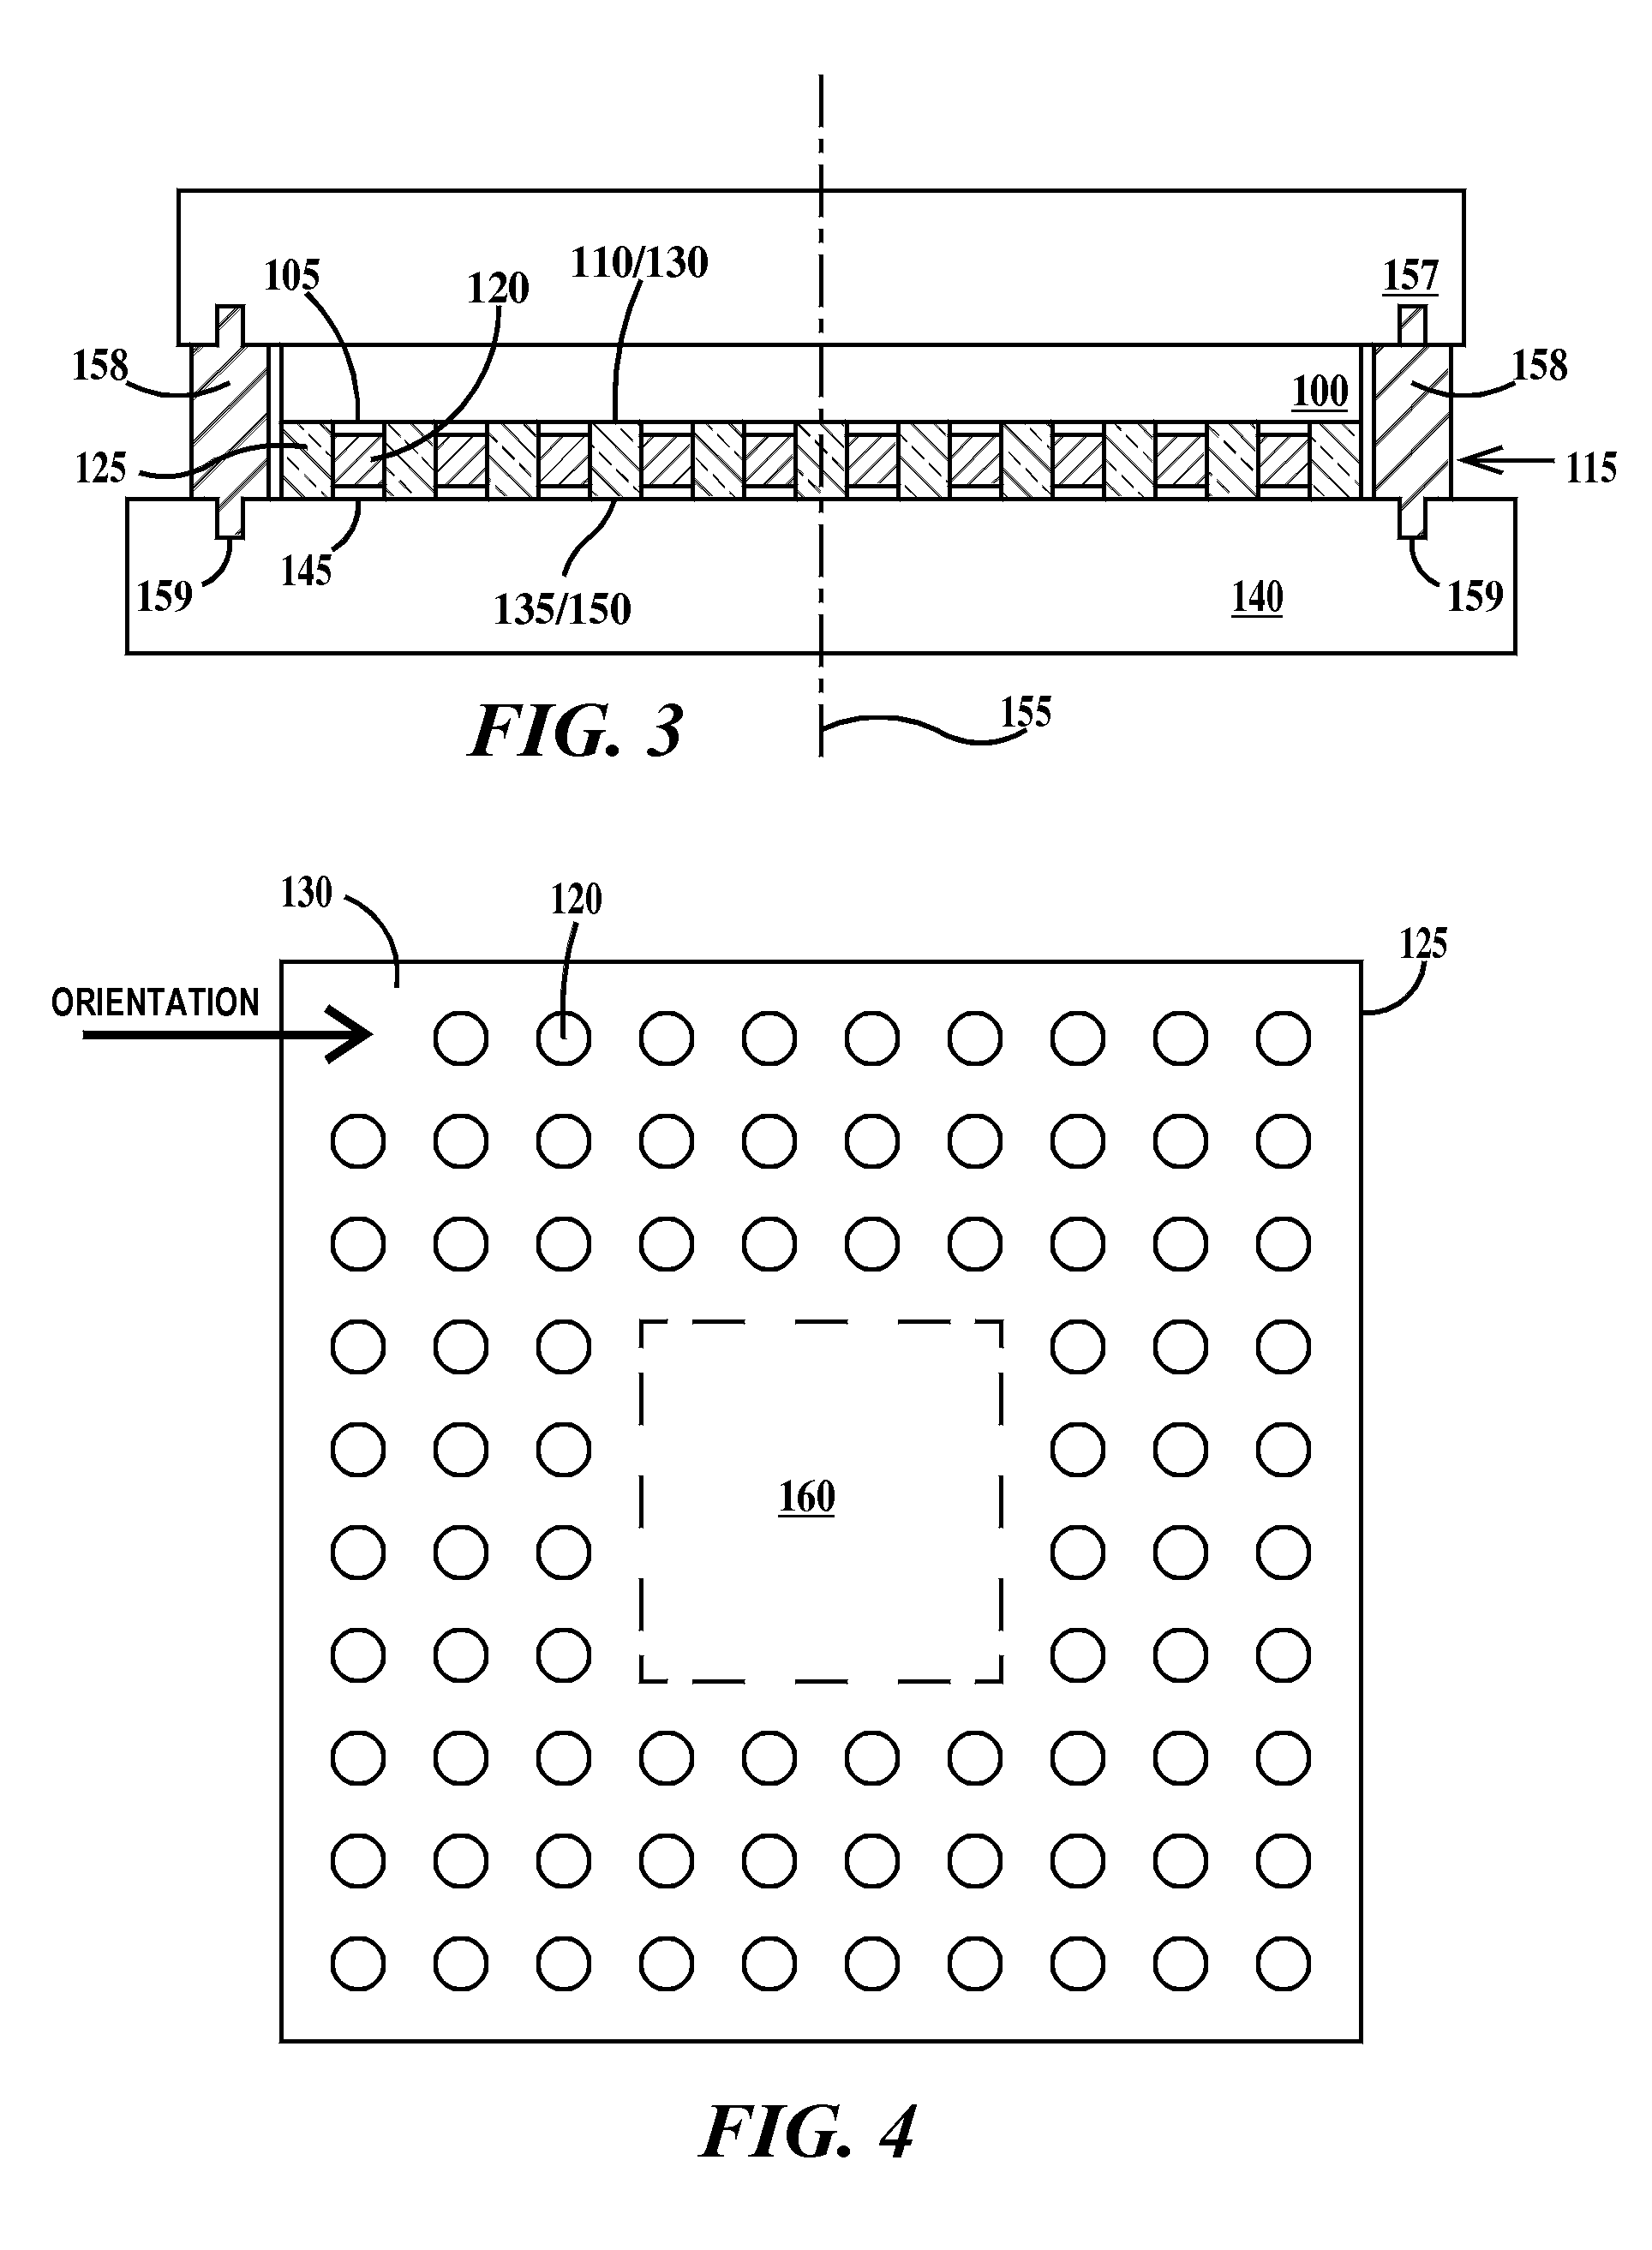 Method of attaching an integrated circuit chip to a module